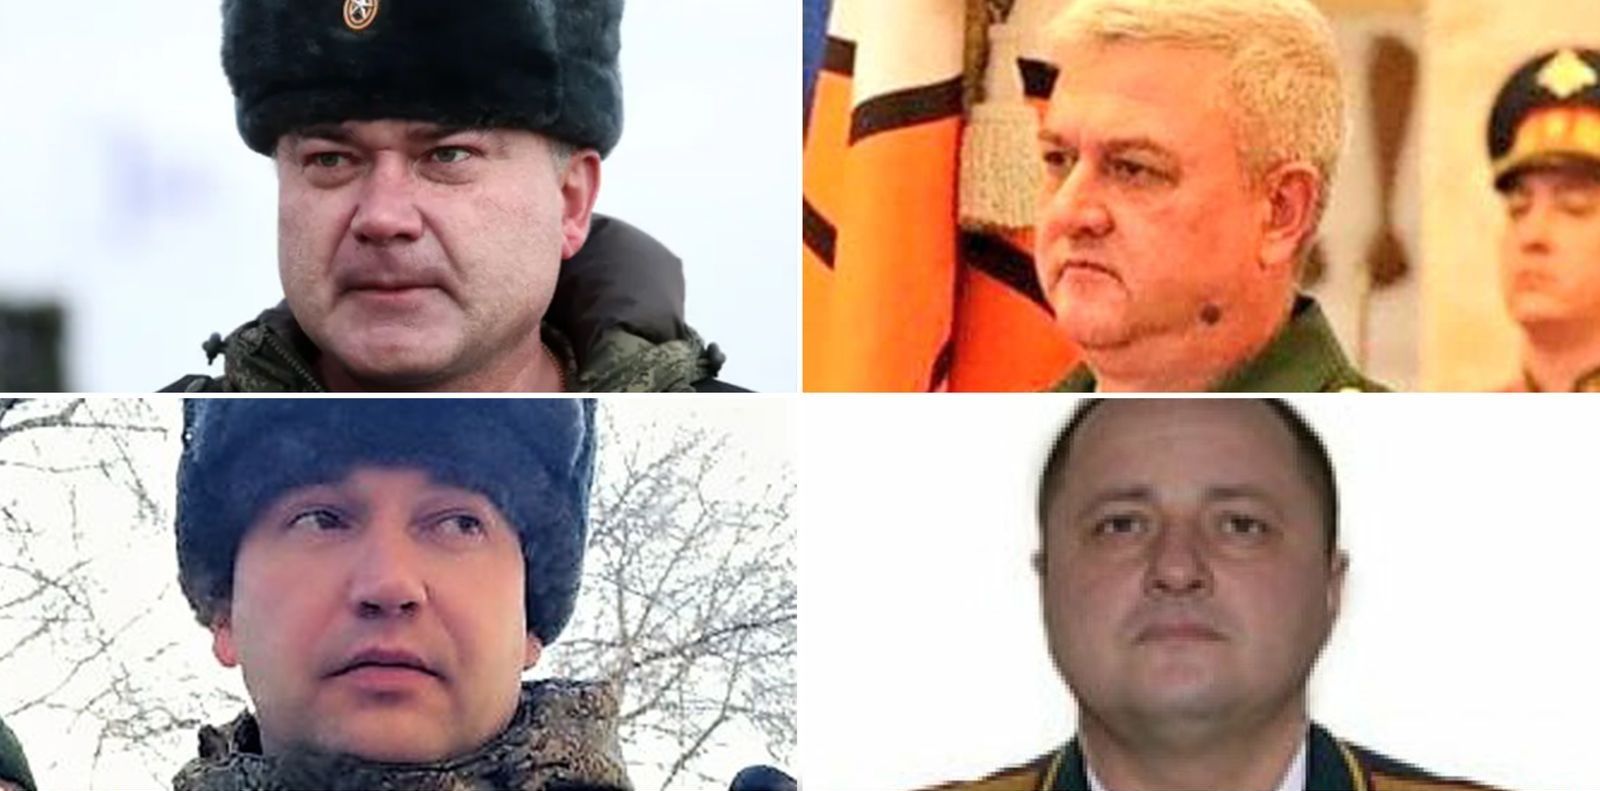 Ukraine war: Who are the dead Russian military officers and what do their deaths tell us about Russia's operation?